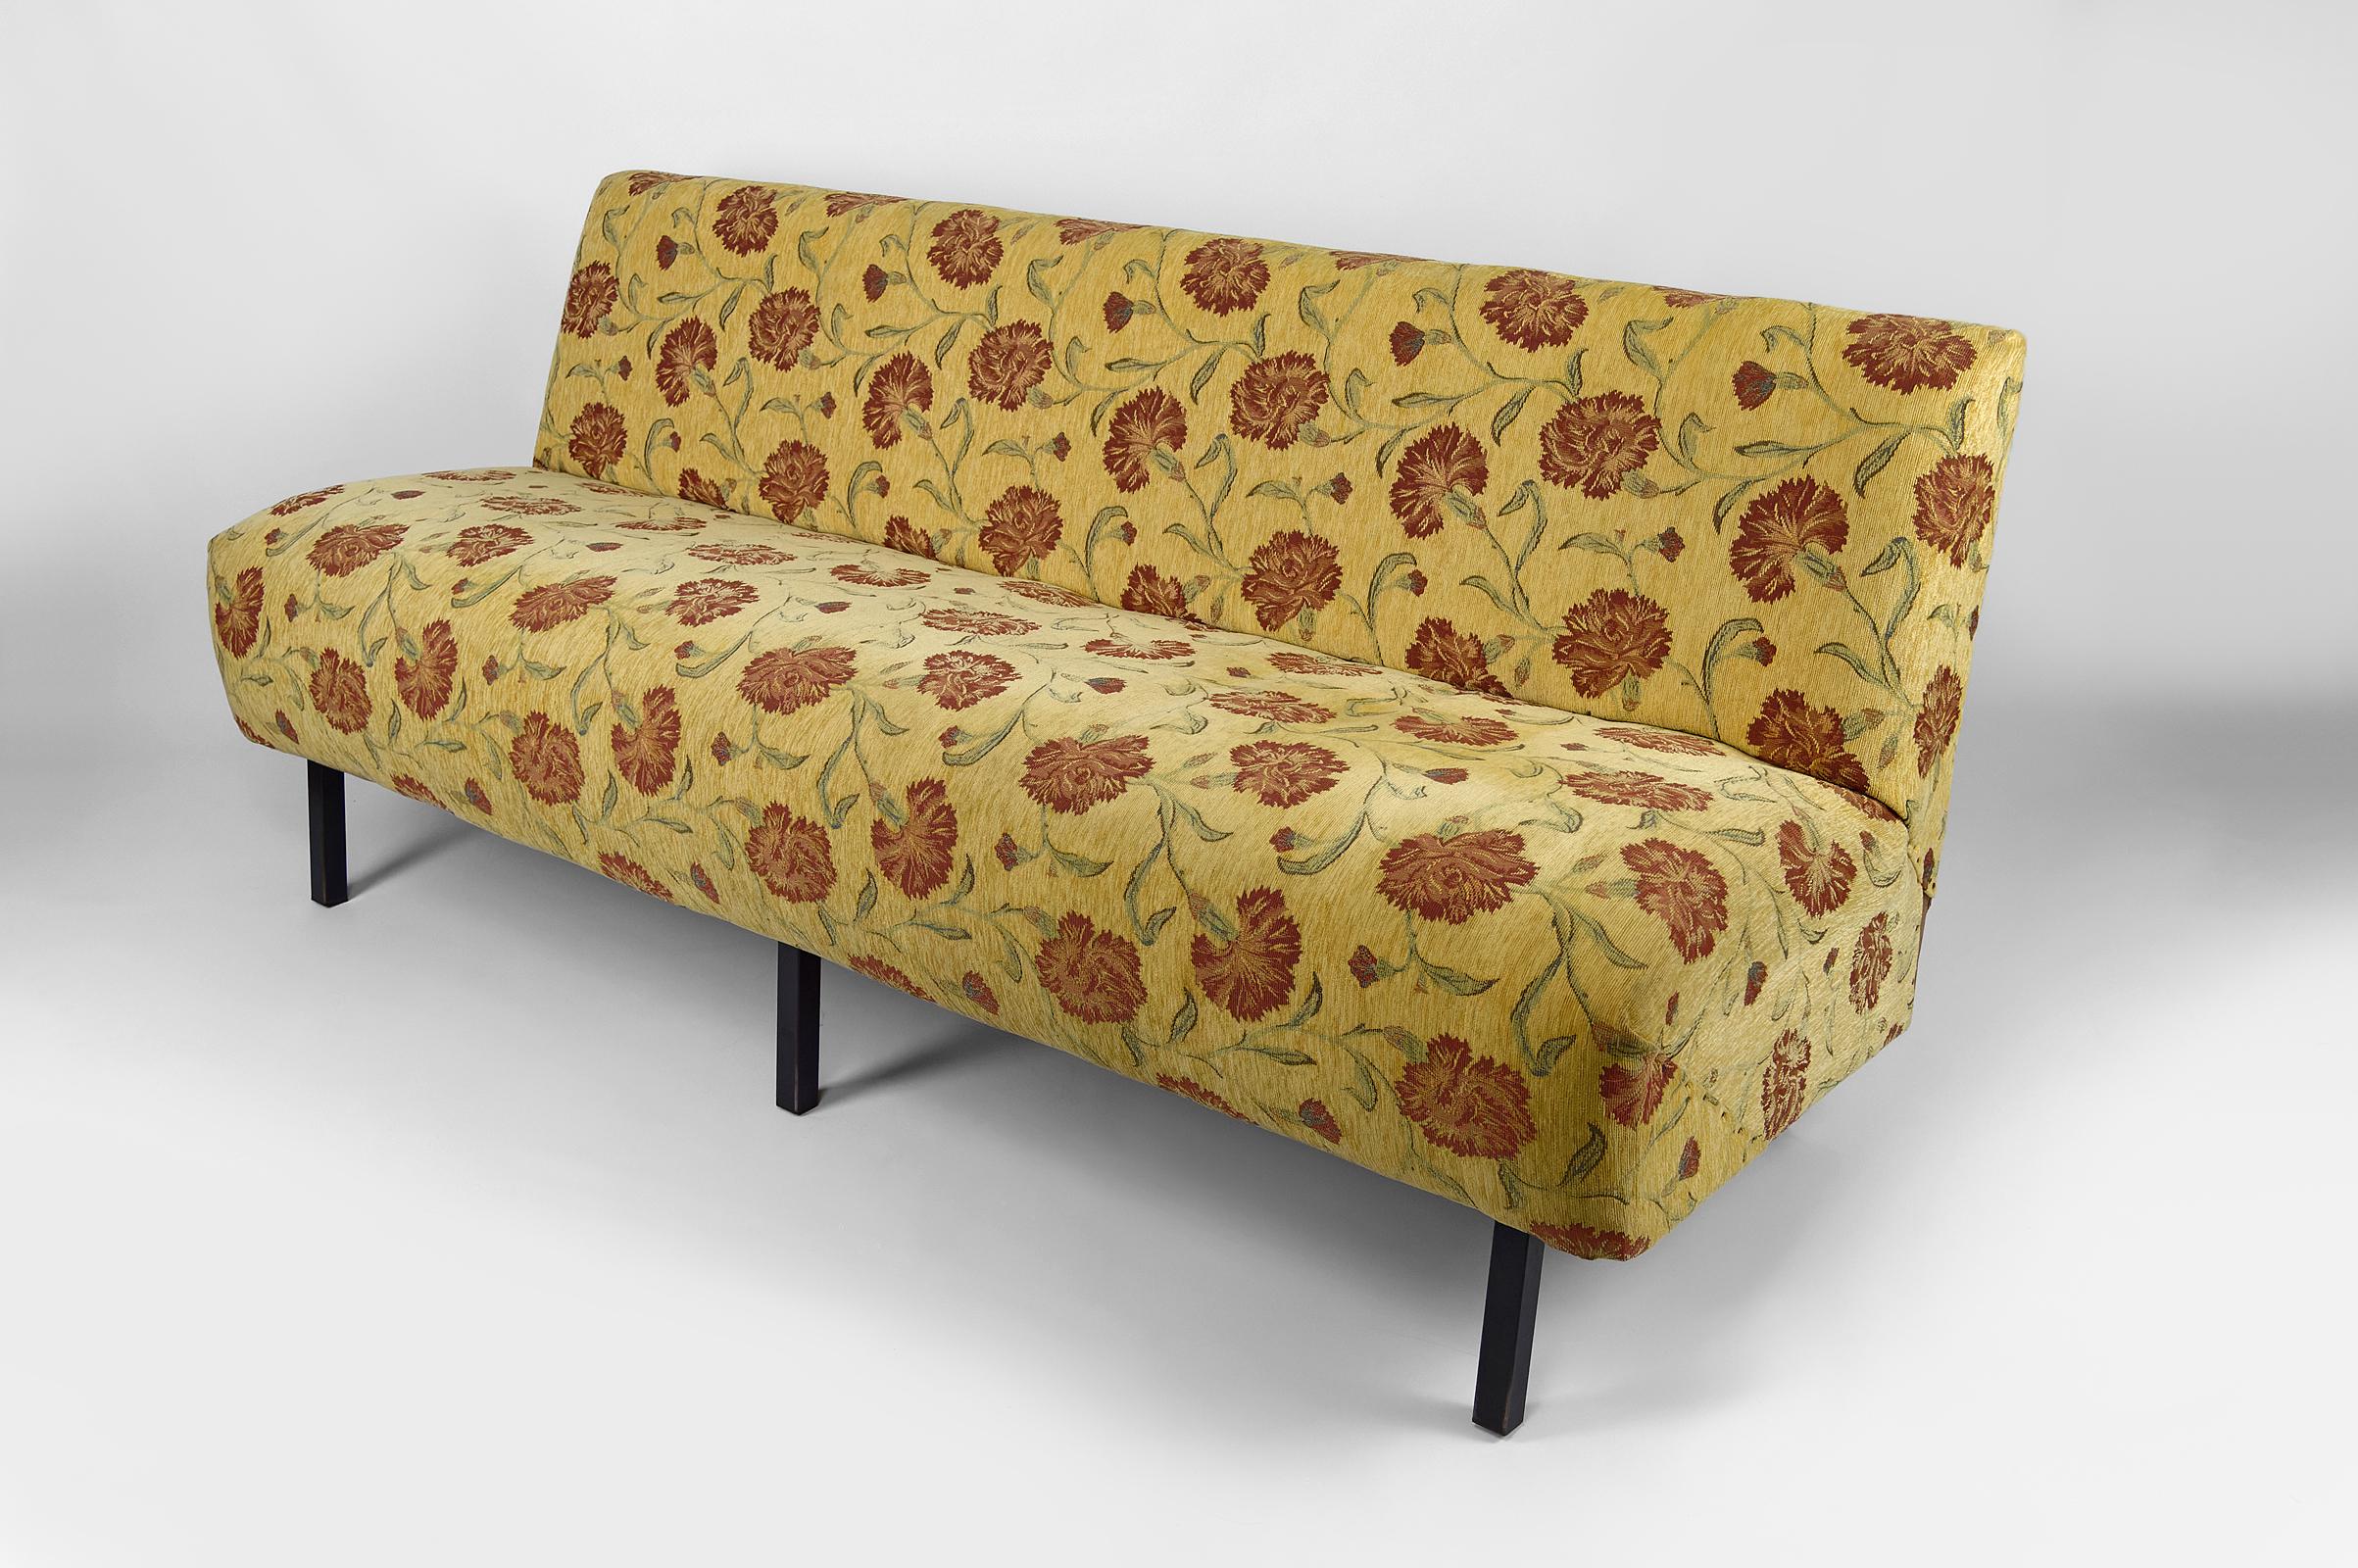 Sofa / bench.
Very pretty floral fabric.
Metal feet.
Boho/ hippie / mid century style.
France, Circa 1960
In good condition.

Dimensions:
height 74 cm
width 180 cm
depth 74 cm
seat height 43 cm